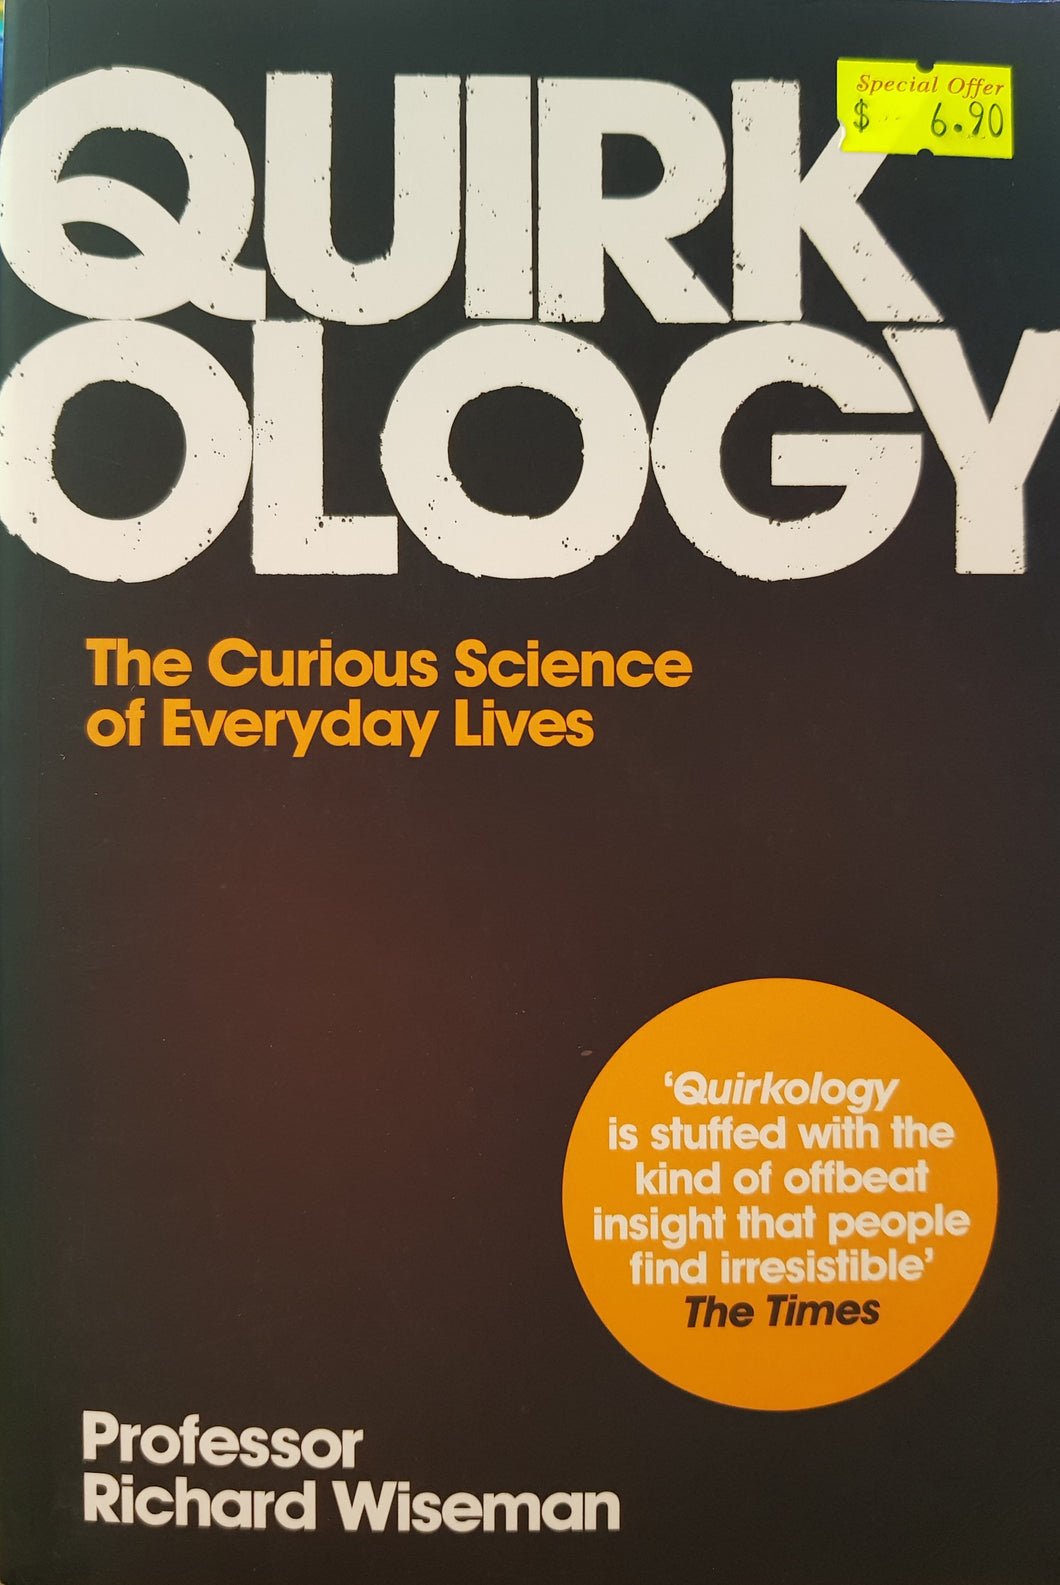 Quirkology: The Curious Science of Everyday Life - Professor Richard Wiseman